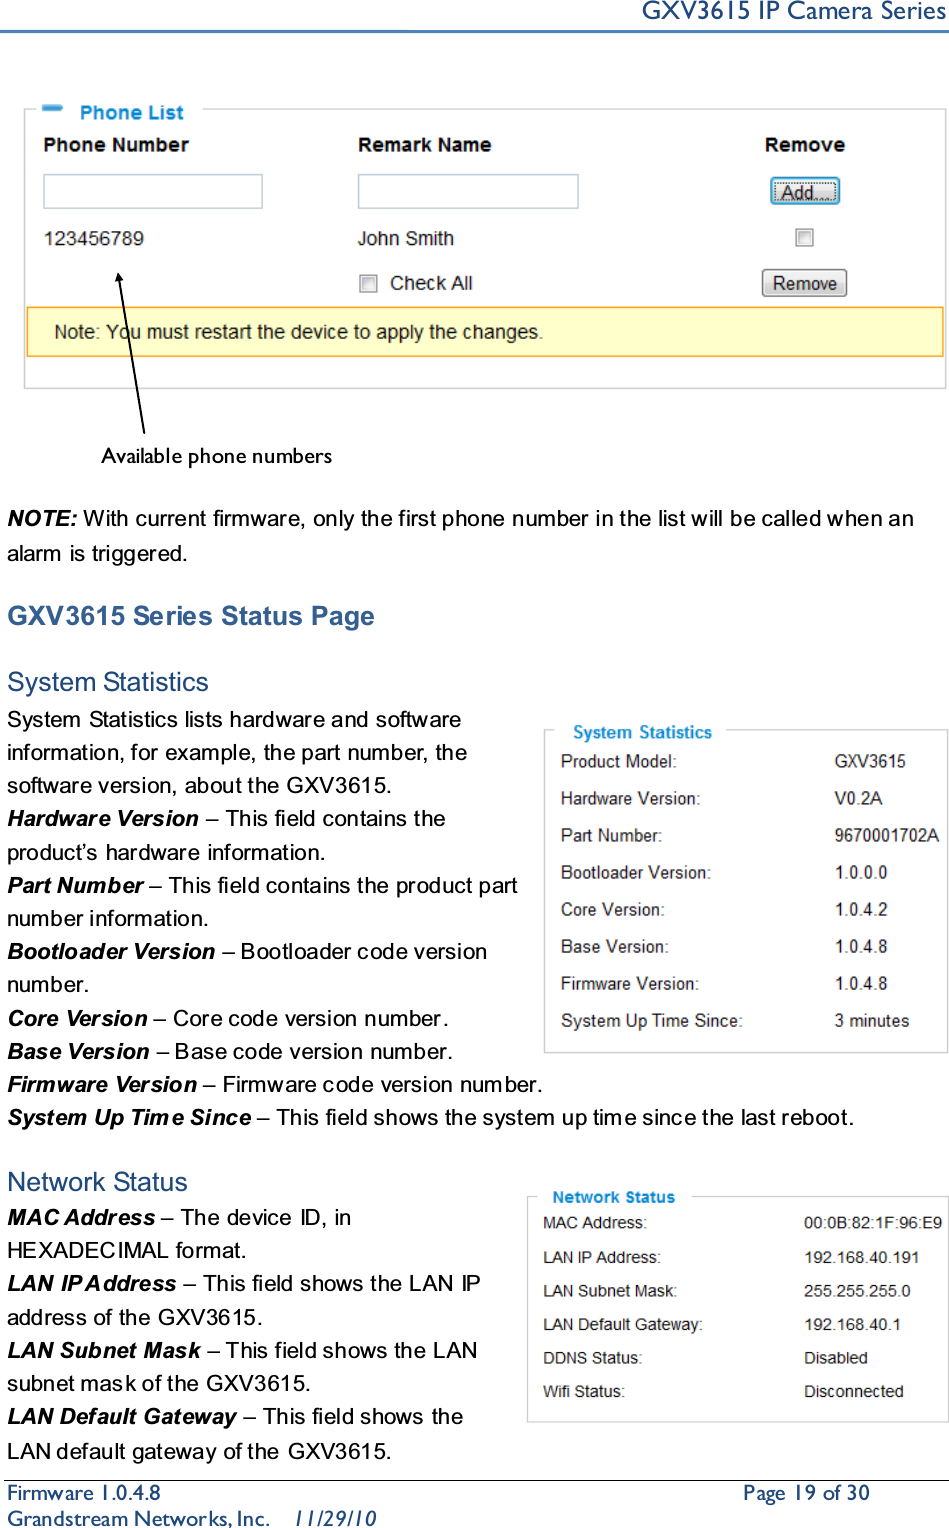 GXV3615 IP Camera SeriesFirmware 1.0.4.8                                                  Page19of 30    Grandstream Networks, Inc. 11/29/10NOTE: With current firmware, only the first phone number in the list will be called when an alarm is triggered.   GXV3615 Series Status PageSystem StatisticsSystem Statistics lists hardware and software information, for example, the part number, the software version, about the GXV3615.Hardware Version ±This field contains the producW¶VKDUGZDUH information.Part Number ±This field contains the product part number information.Bootloader Version ±Bootloader c ode version number.Core Version ±Core code version number.Base Version ±Base code version number.Firmware Version ±Firmware c ode version num ber.System Up Tim e Since ±This field shows the system up tim e sinc e the last reboot.Network StatusMAC Address ±The device ID, in HEXADECIMAL format.LAN IP Address ±This field shows the LAN IP address of the GXV3615.LAN Subnet Mask ±This field shows the LAN subnet mas k of the GXV3615.LAN Default Gateway ±This field shows the LAN default gateway of the GXV3615.Available phone numbers 